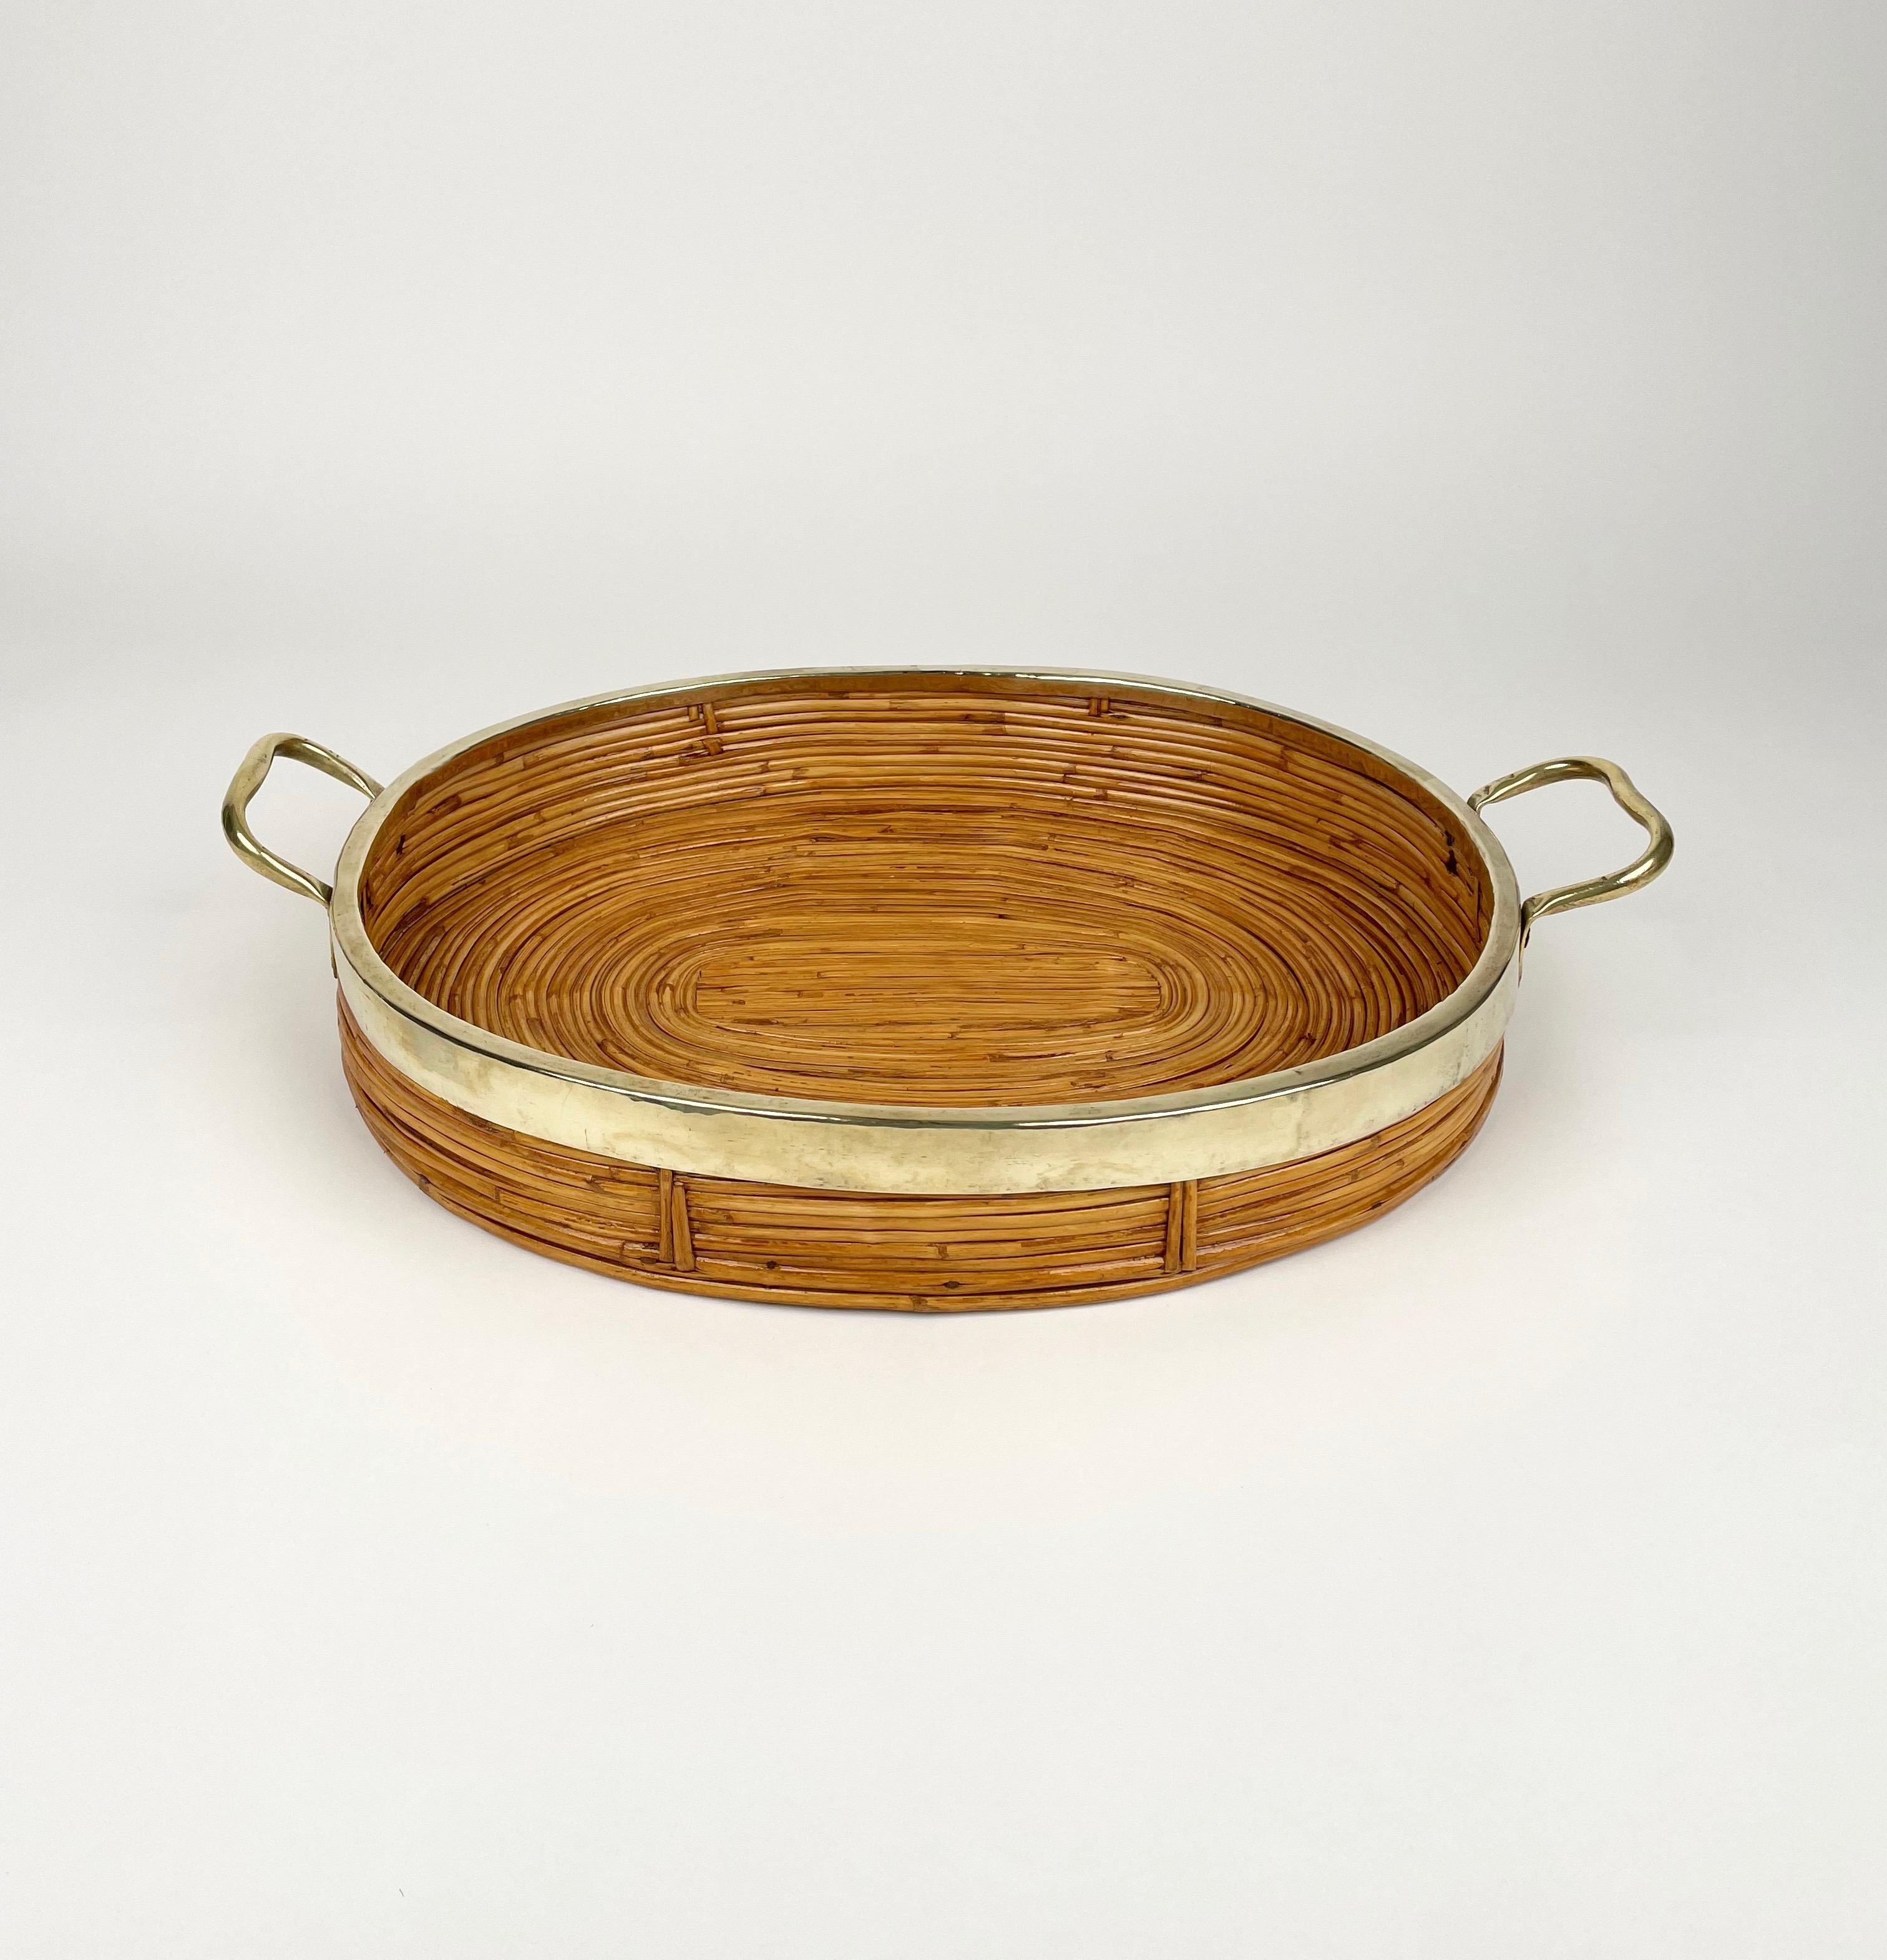 Oval Serving Tray Bamboo, Rattan & Brass, Italy 1970s For Sale 3